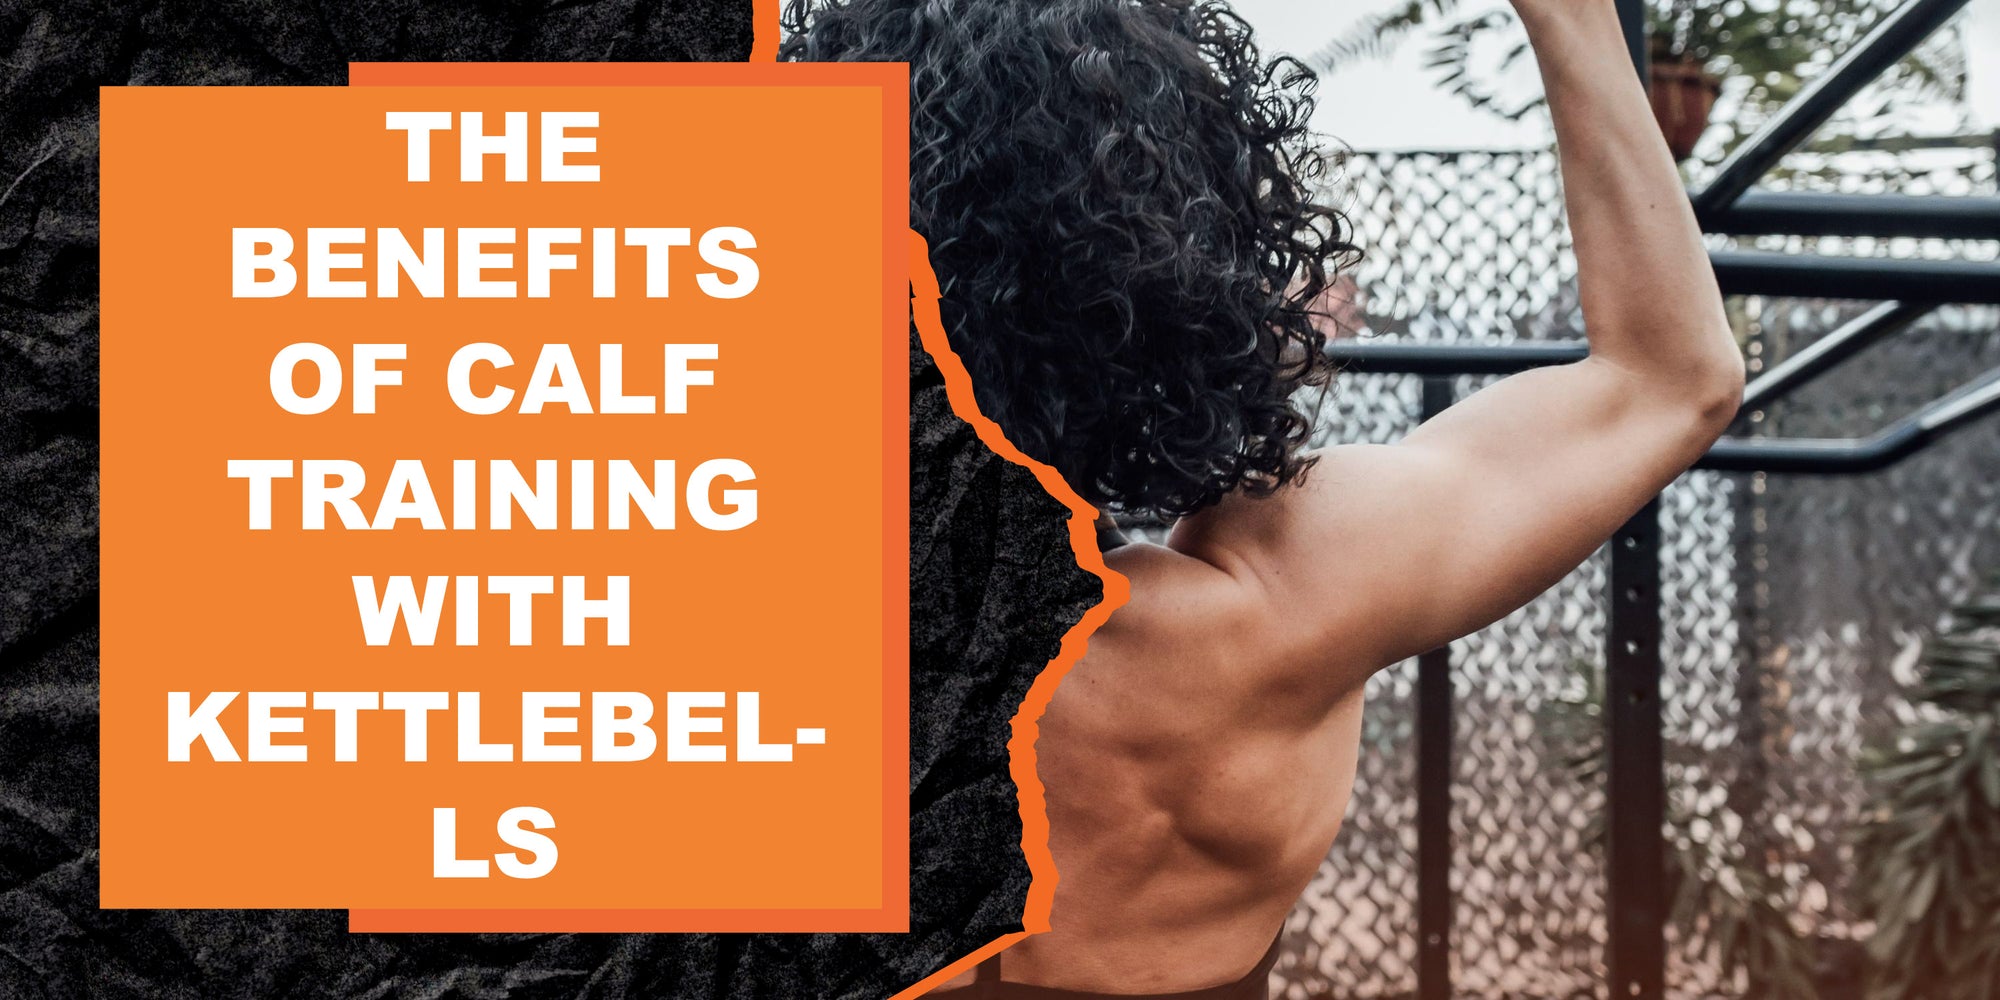 The Benefits of Calf Training with Kettlebells